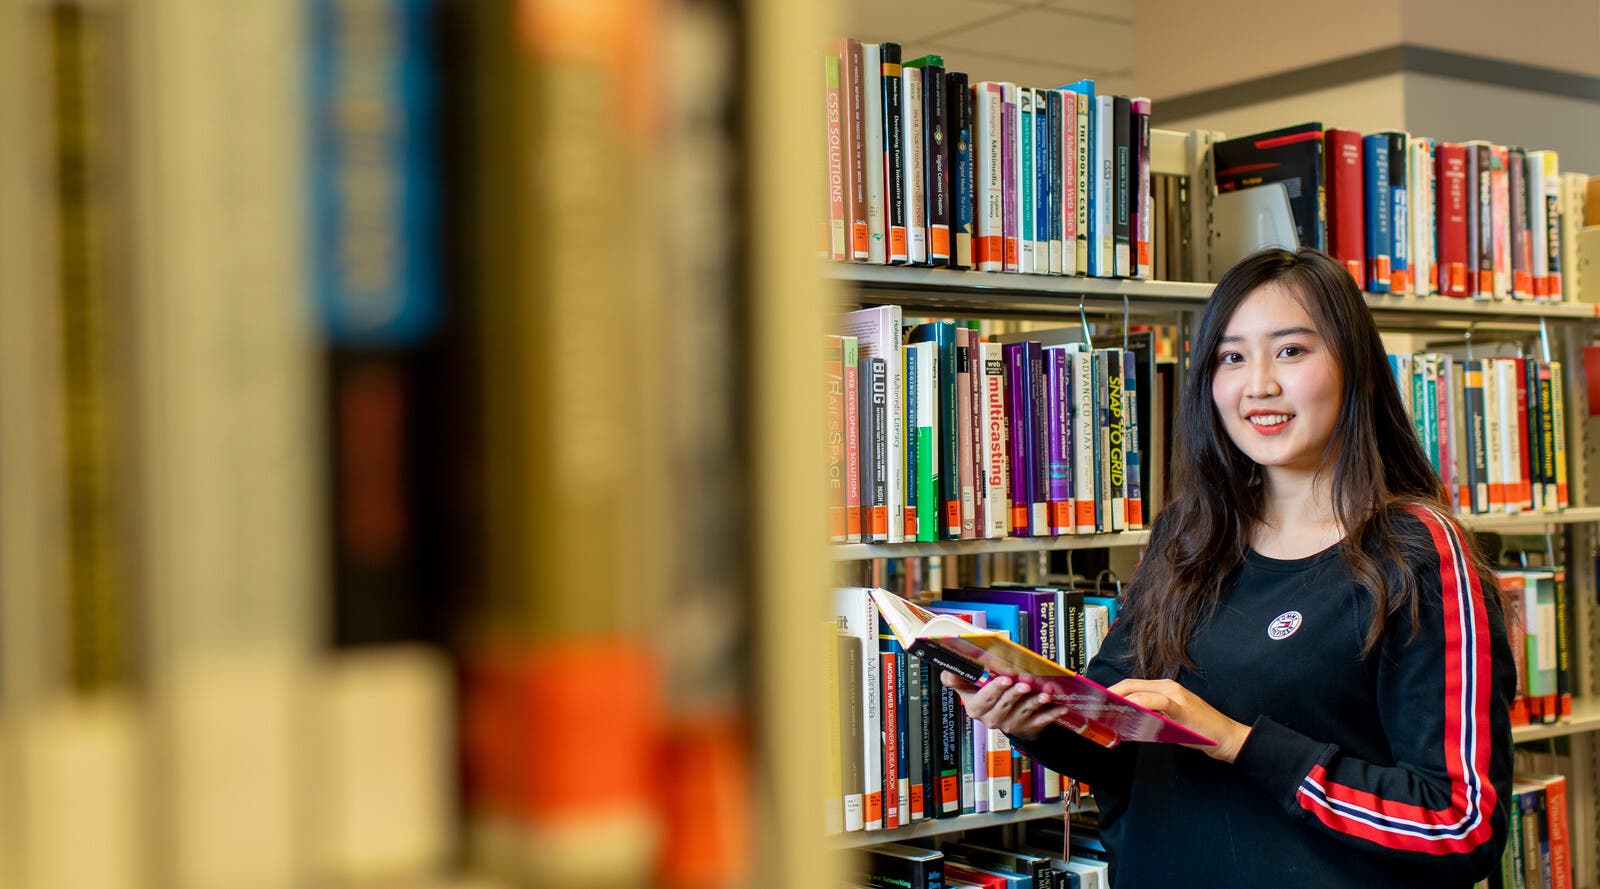 Student holding book in library